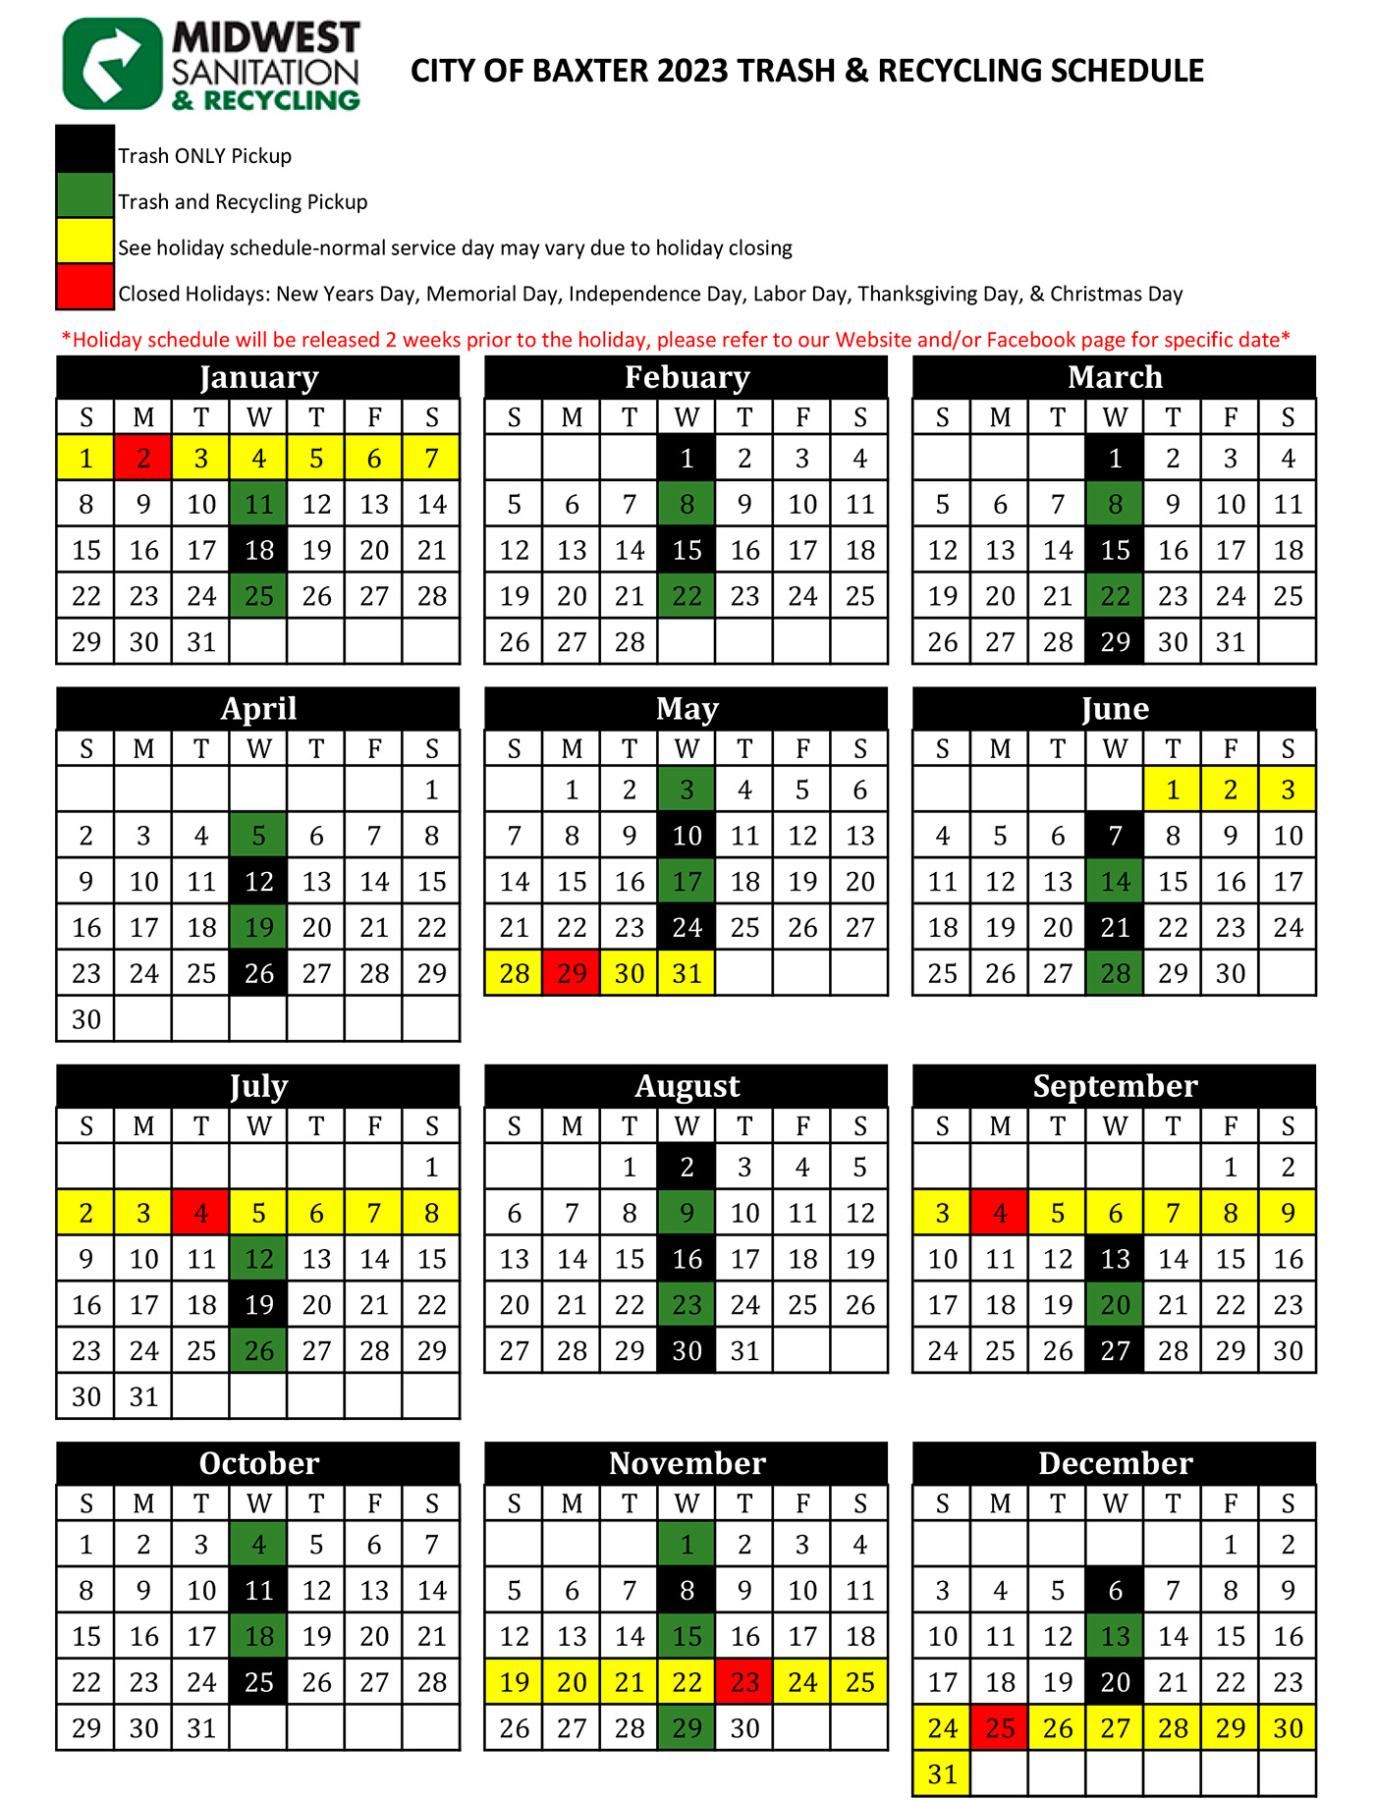 City of Baxter Trash & Recycling Schedule 2023